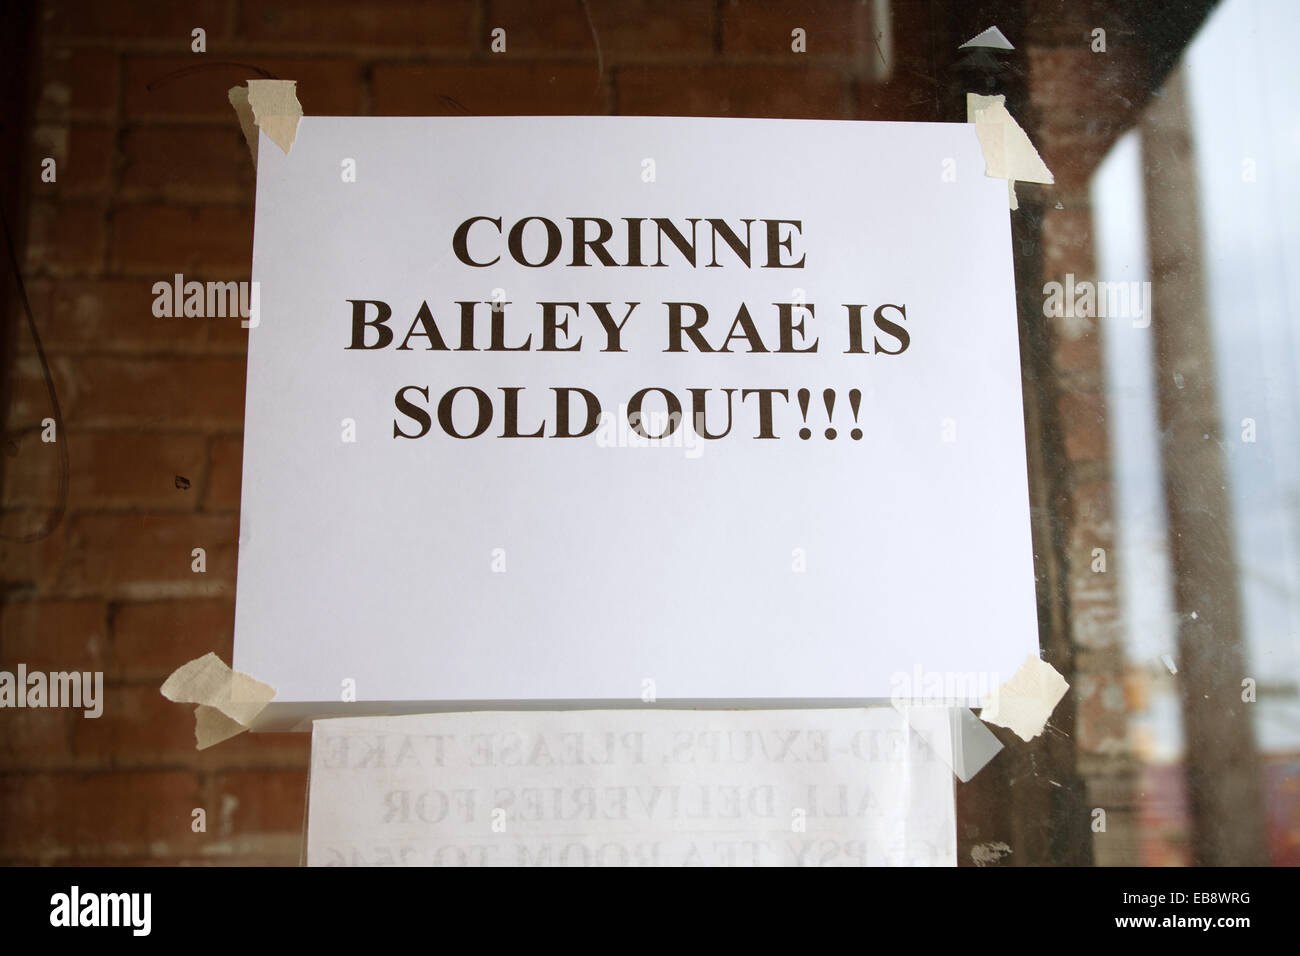 Corinne Bailey Rae sold out sign at the Gypsy Tea Rooms venue , Deep Ellum, Dallas, Texas, United States of America. Stock Photo